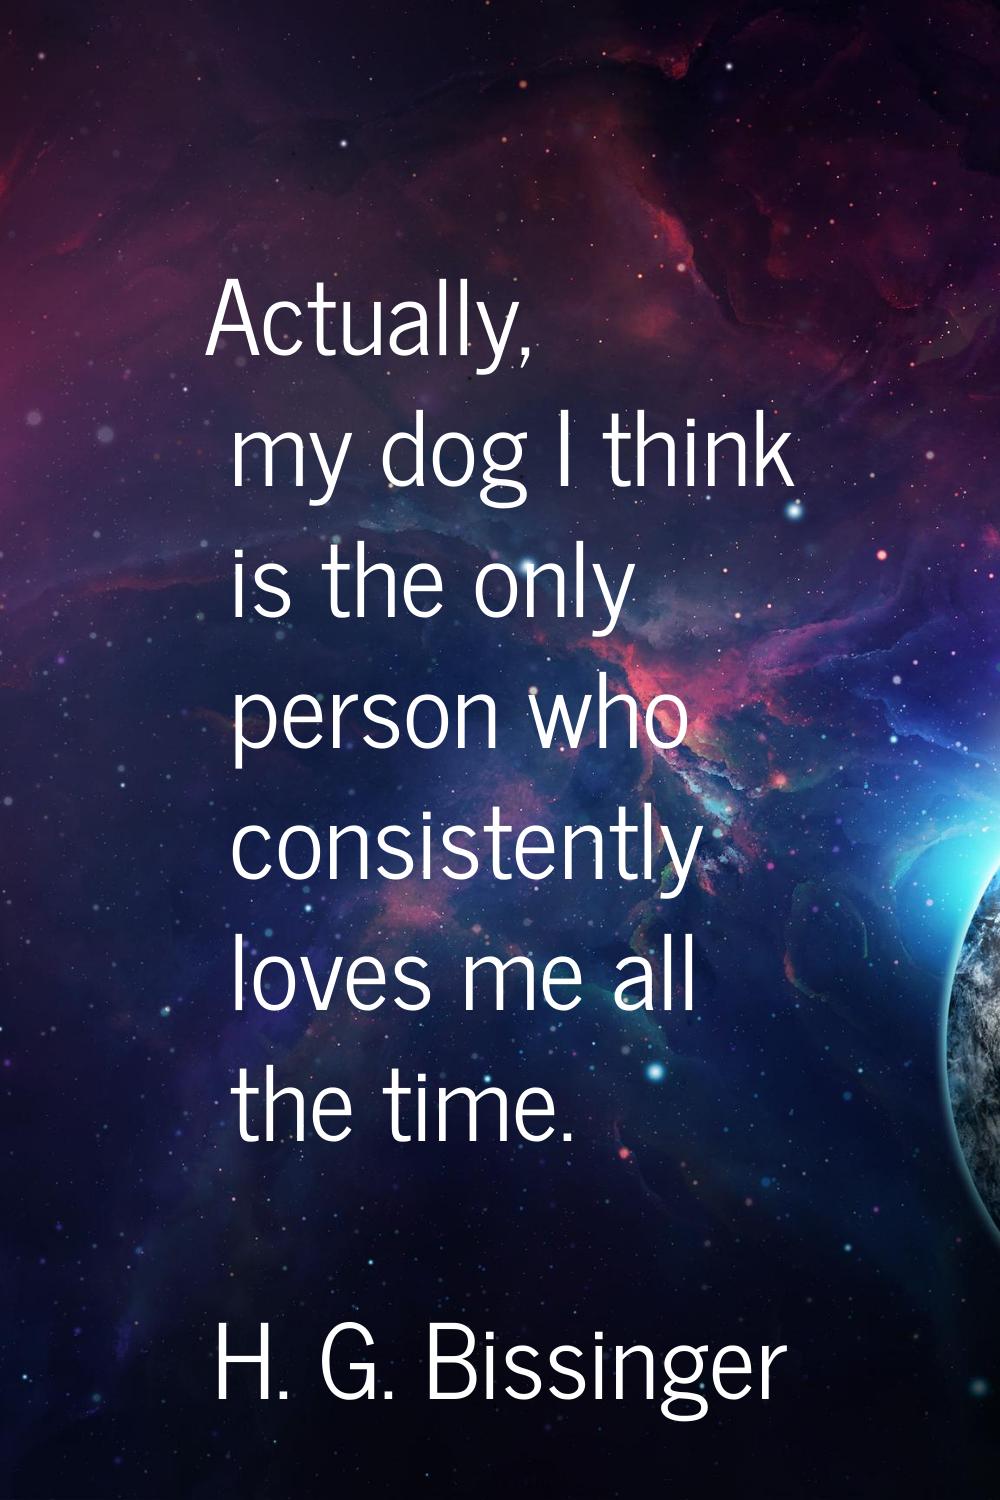 Actually, my dog I think is the only person who consistently loves me all the time.